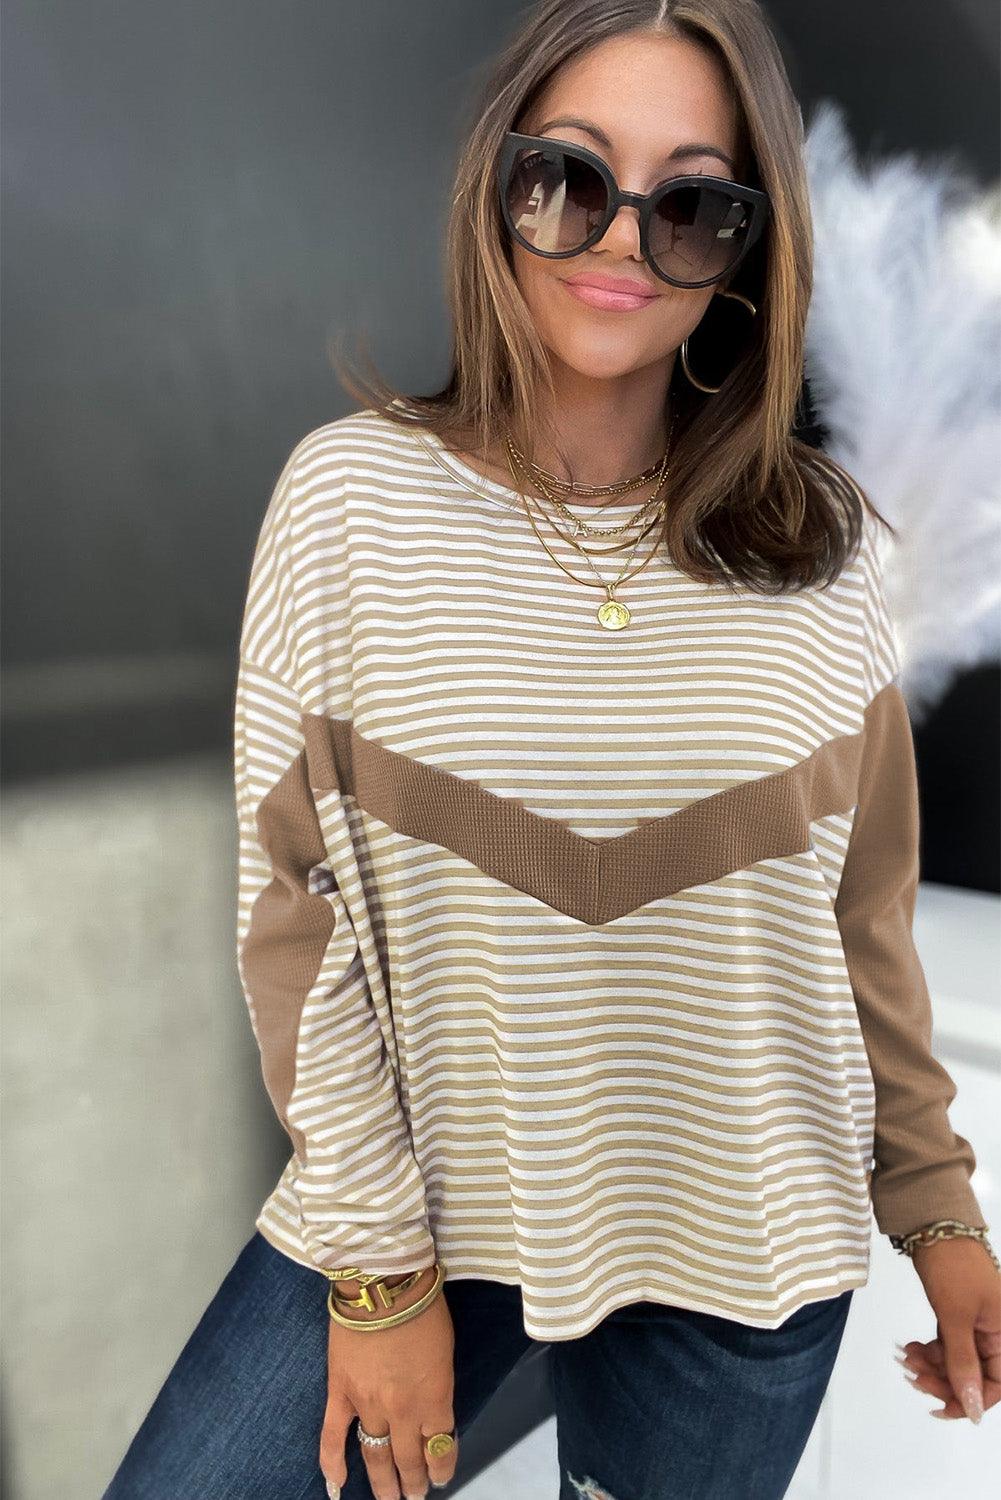 Striped Patchwork Long Sleeve Top - L & M Kee, LLC